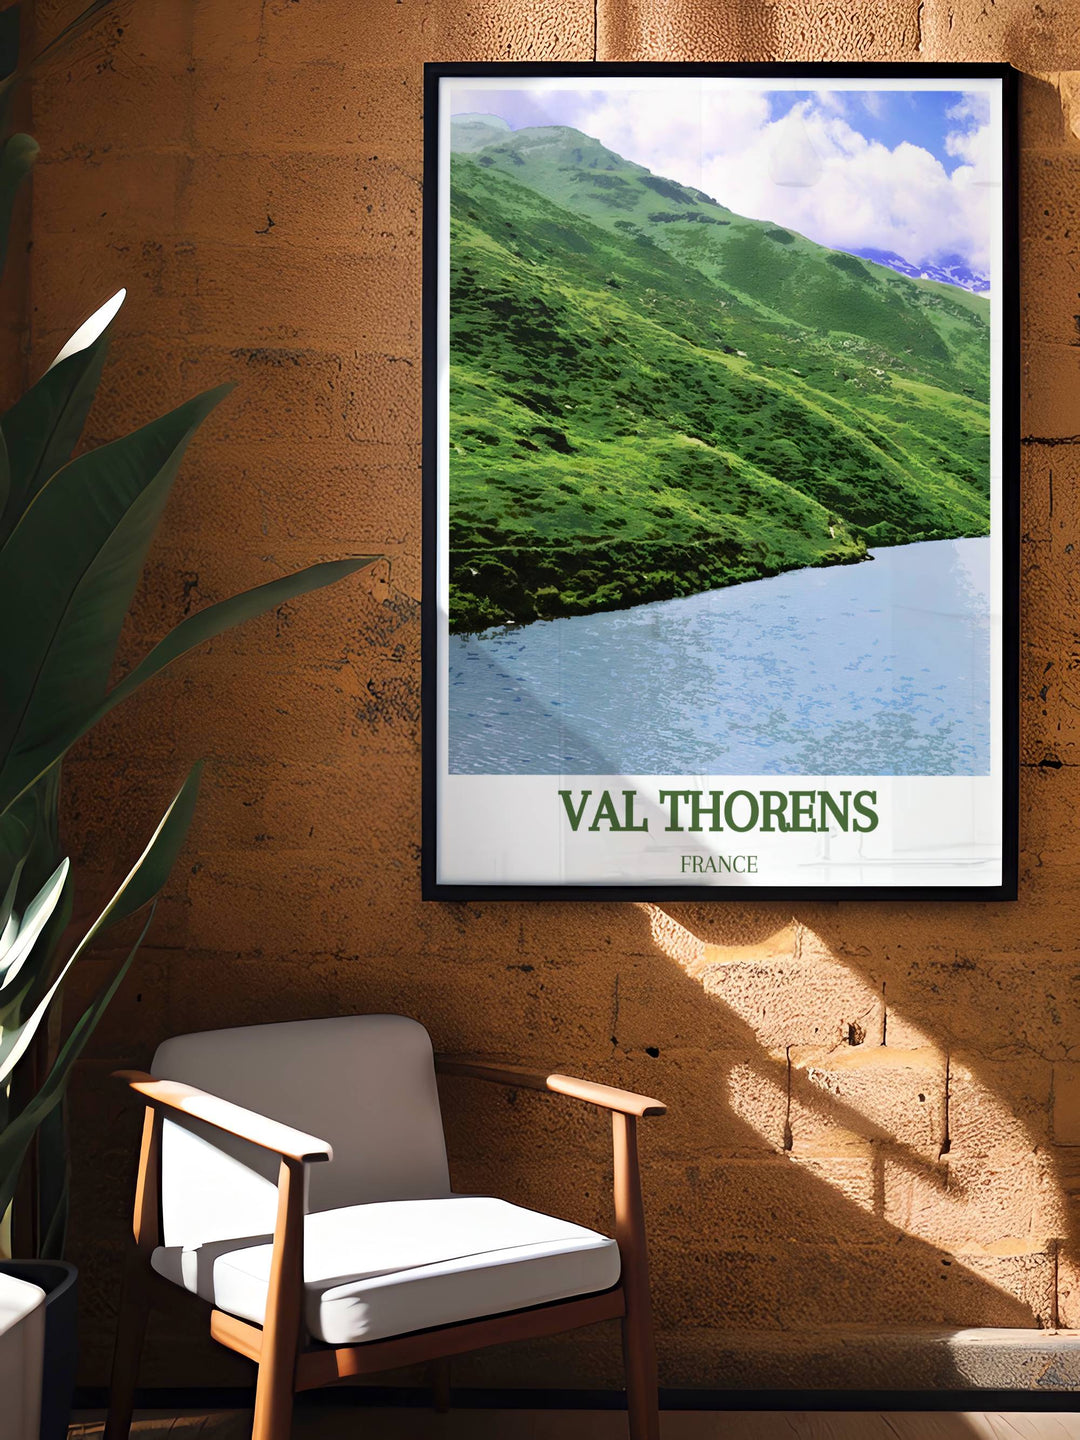 Fine art print of Lac du Lou in Val Thorens, offering a detailed and vibrant depiction of the French Alps. Ideal for adding a touch of elegance and adventure to your home decor.